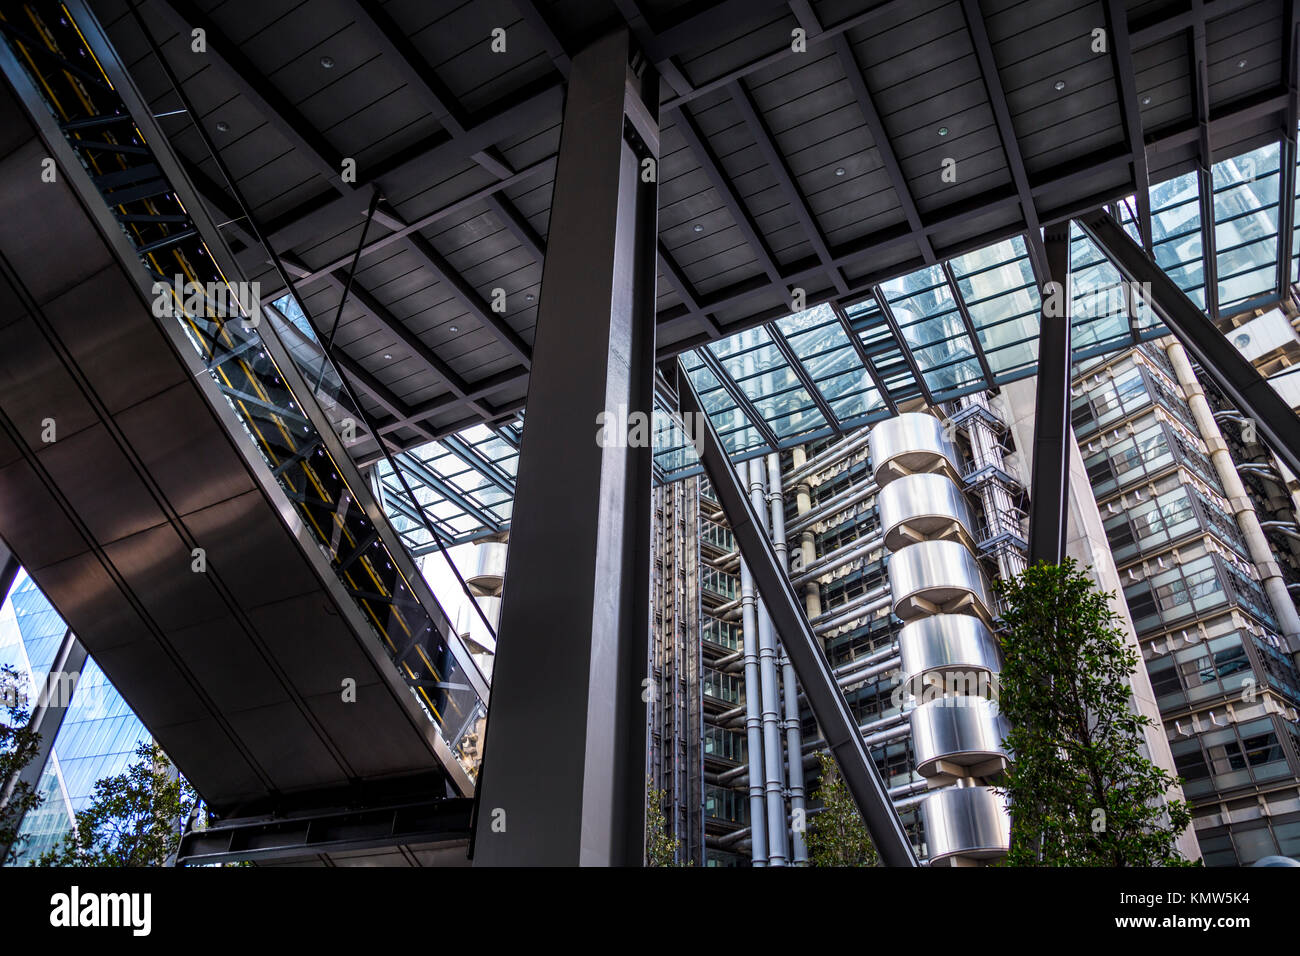 Modern architecture - view of the Lloyds Building from the Leadenhall Building atrium, London, UK Stock Photo